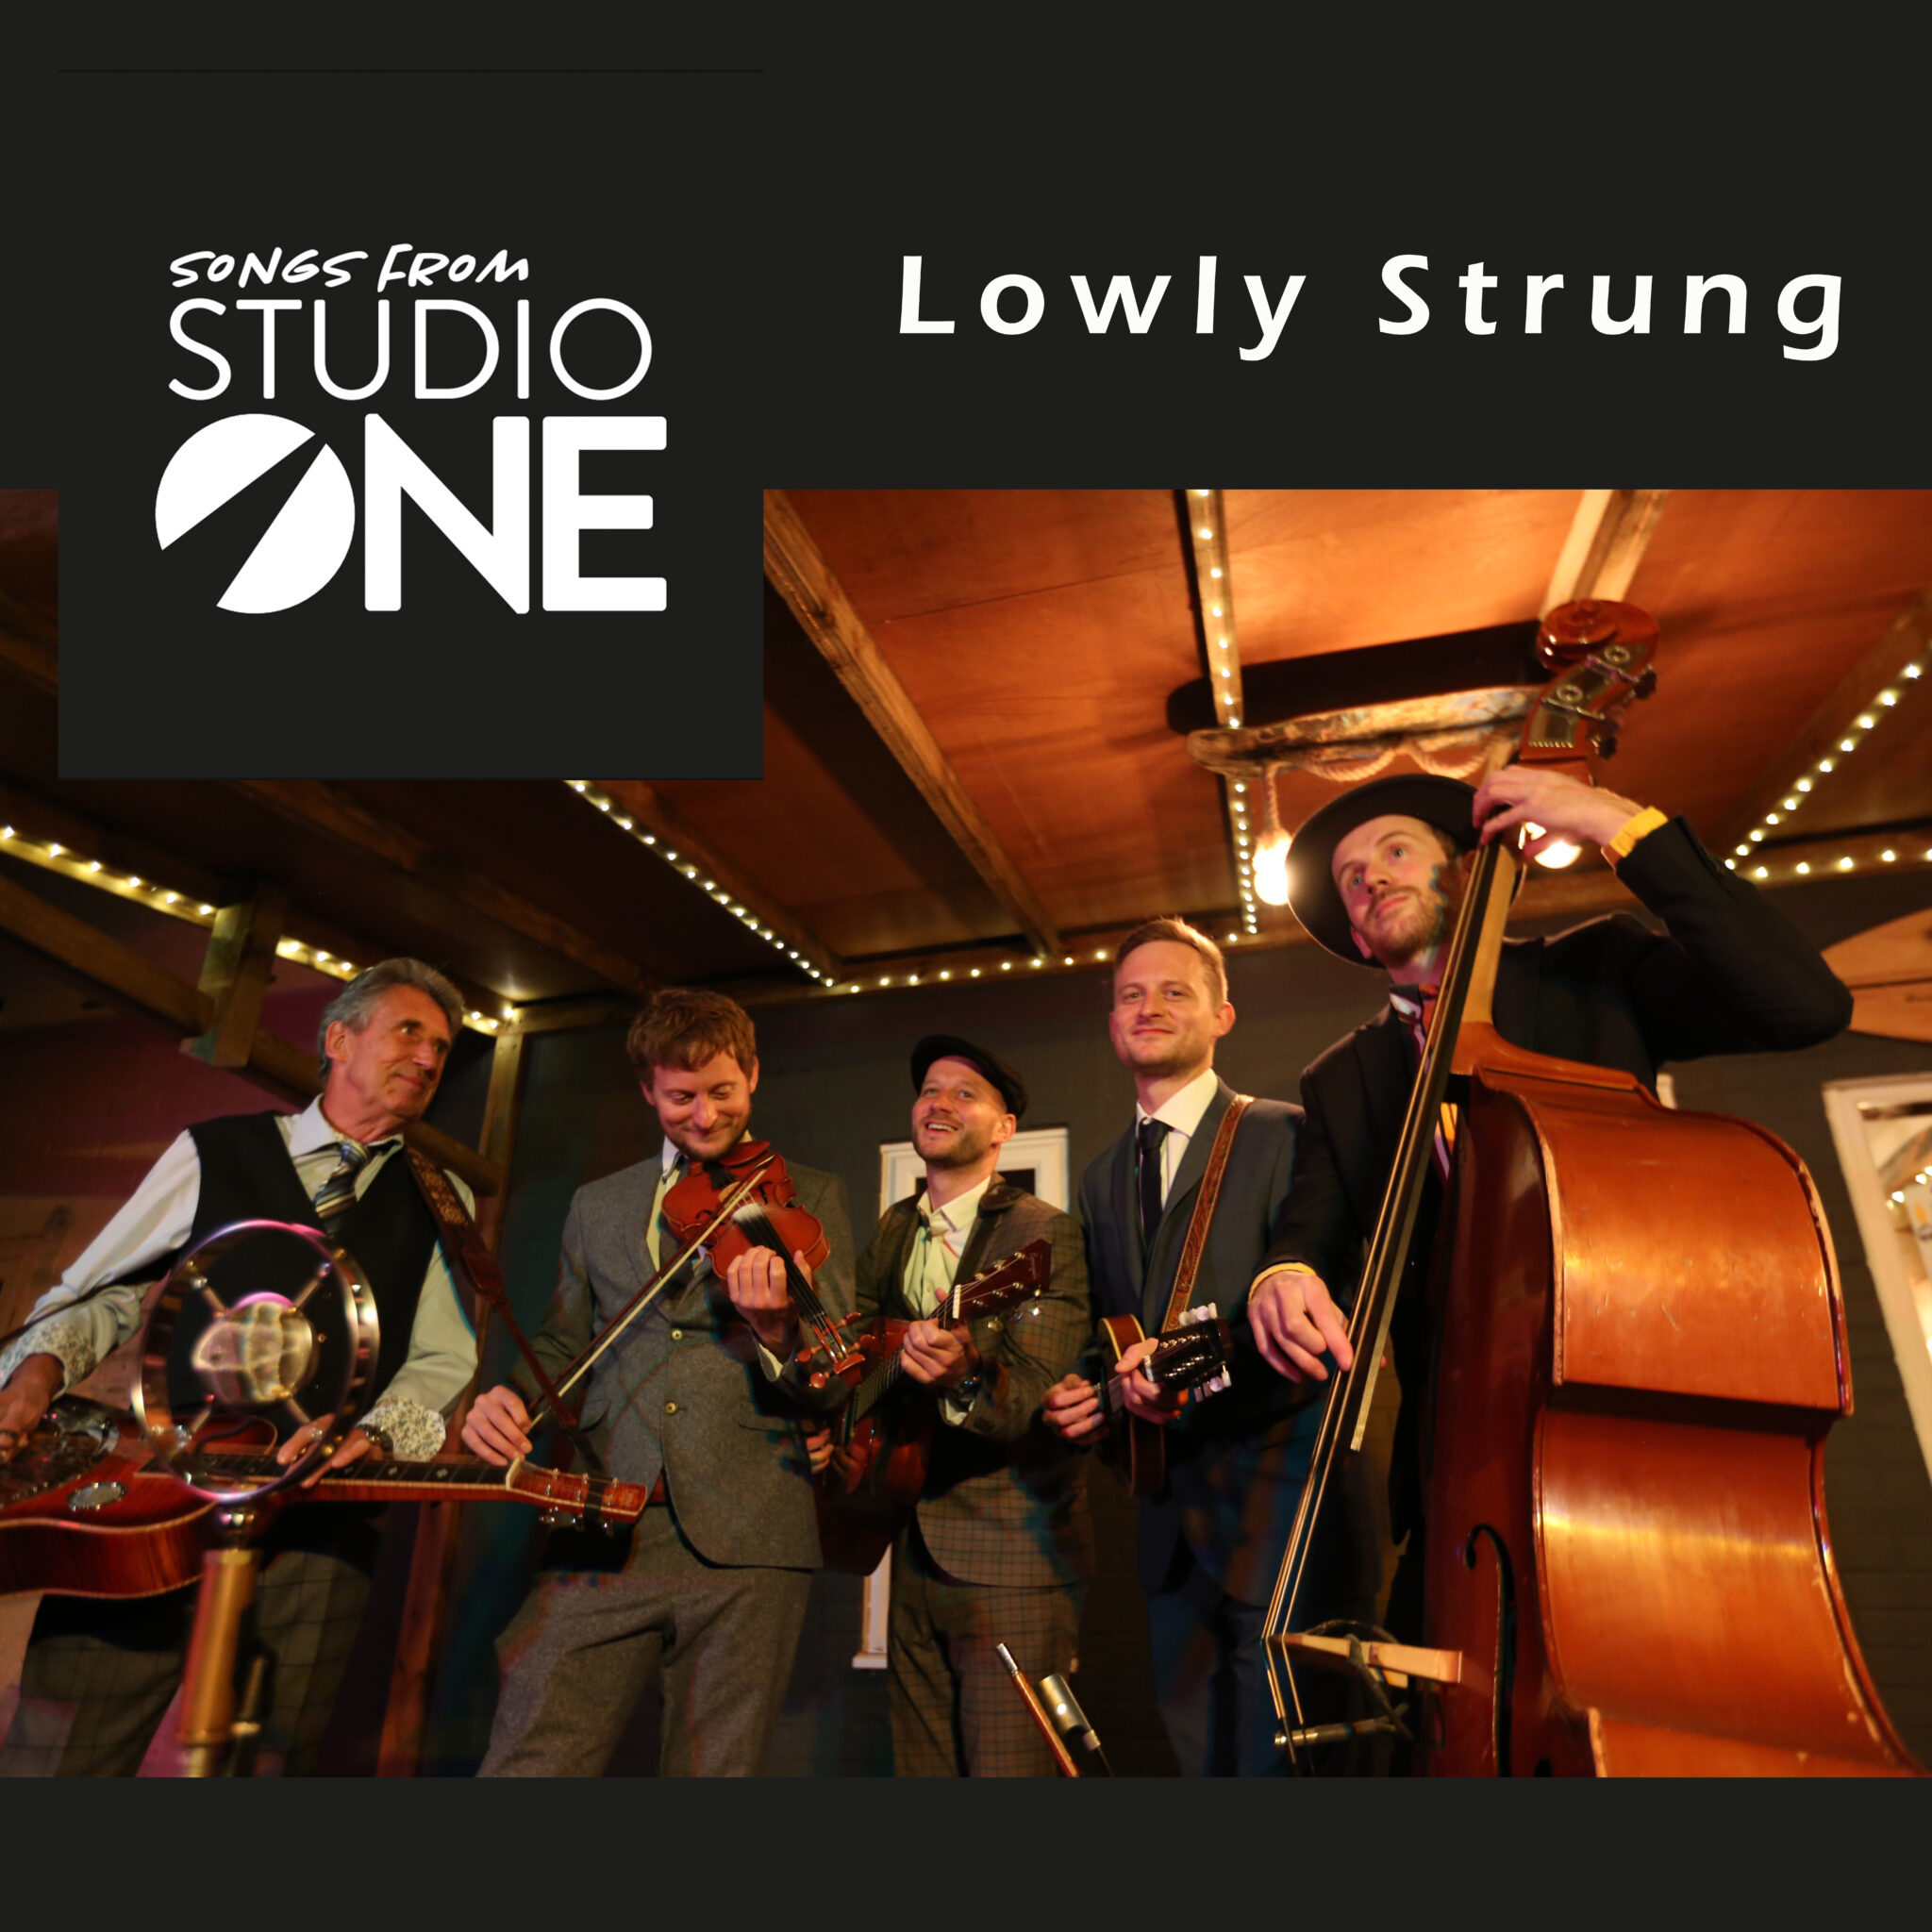 Songs in Studio One with Lowly Strung